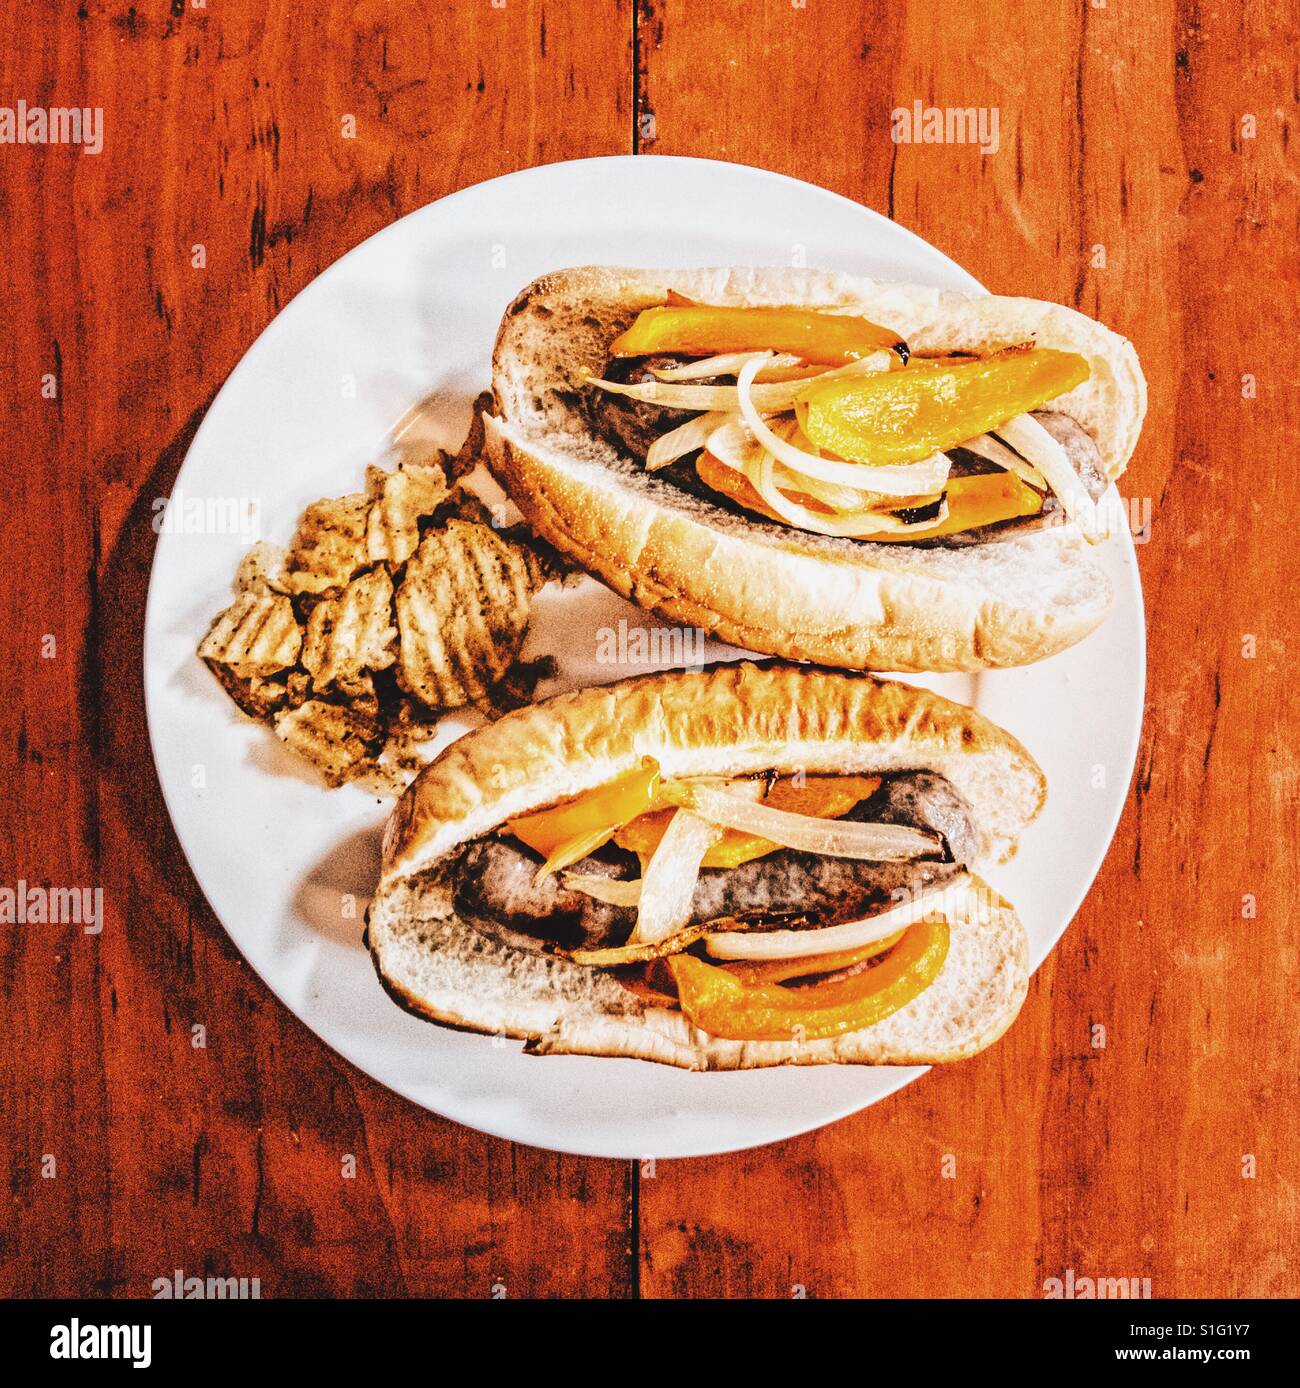 Brats and chips: game food Stock Photo